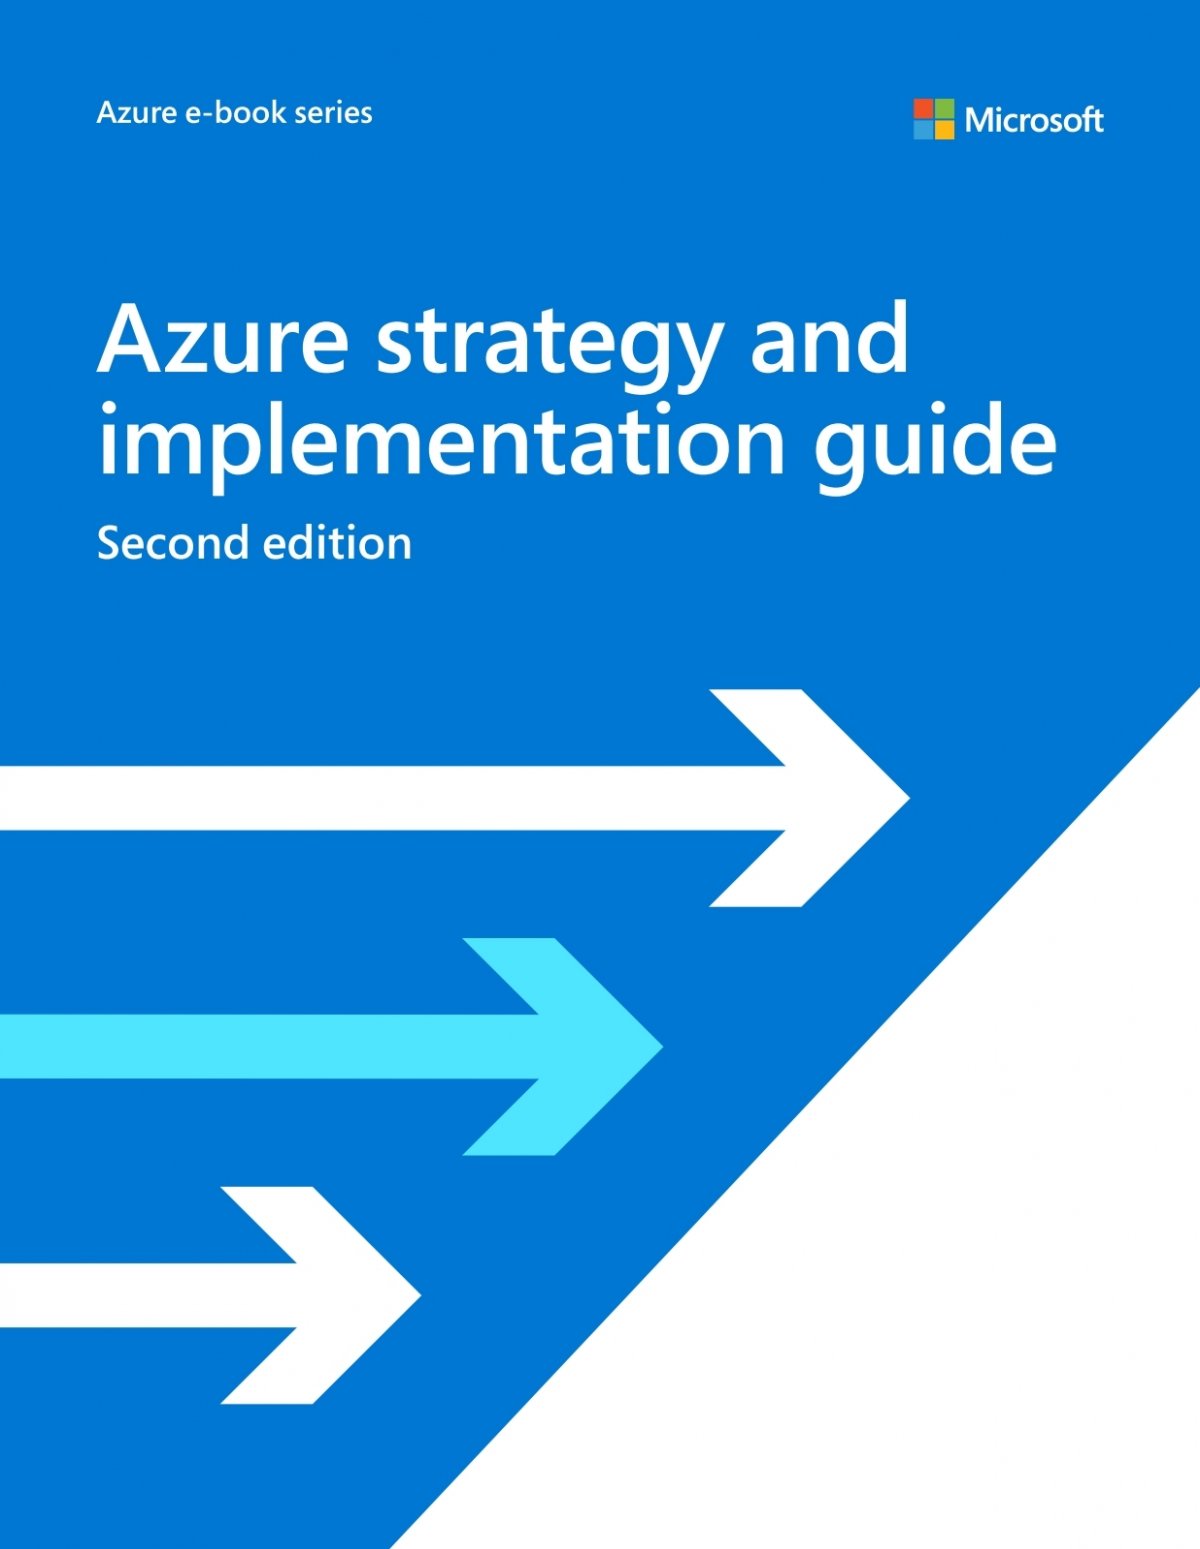 Azure_Strategic_Implementation_Guide_for_IT_Organizations_New_to_Azure